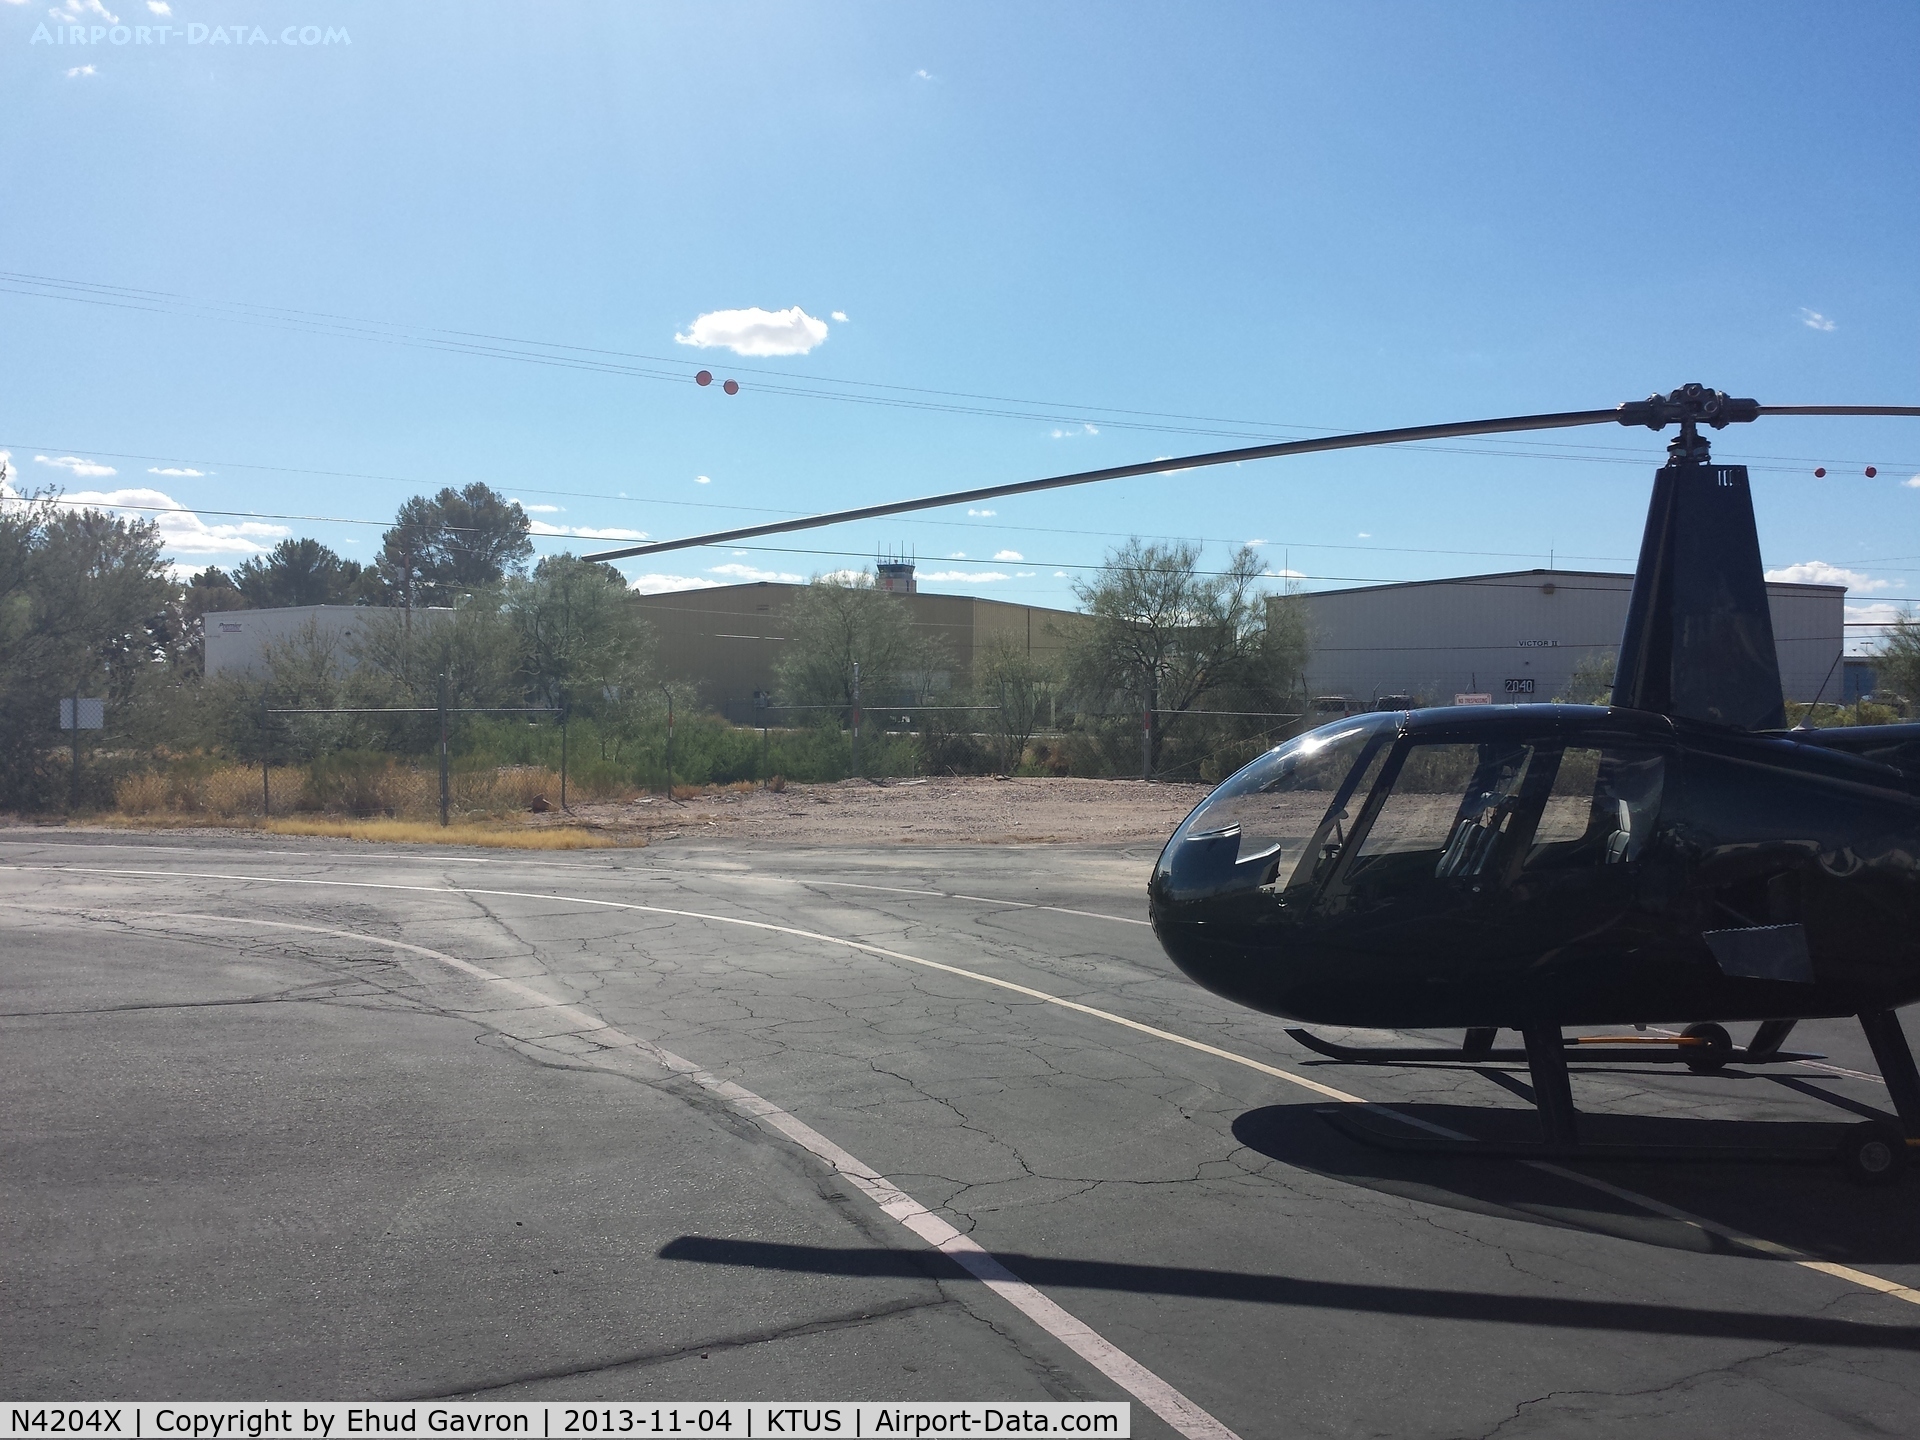 N4204X, Robinson R44 II C/N 12625, N4204X at home base, Tucson Arizona, after the initial ferry flight from KORL.